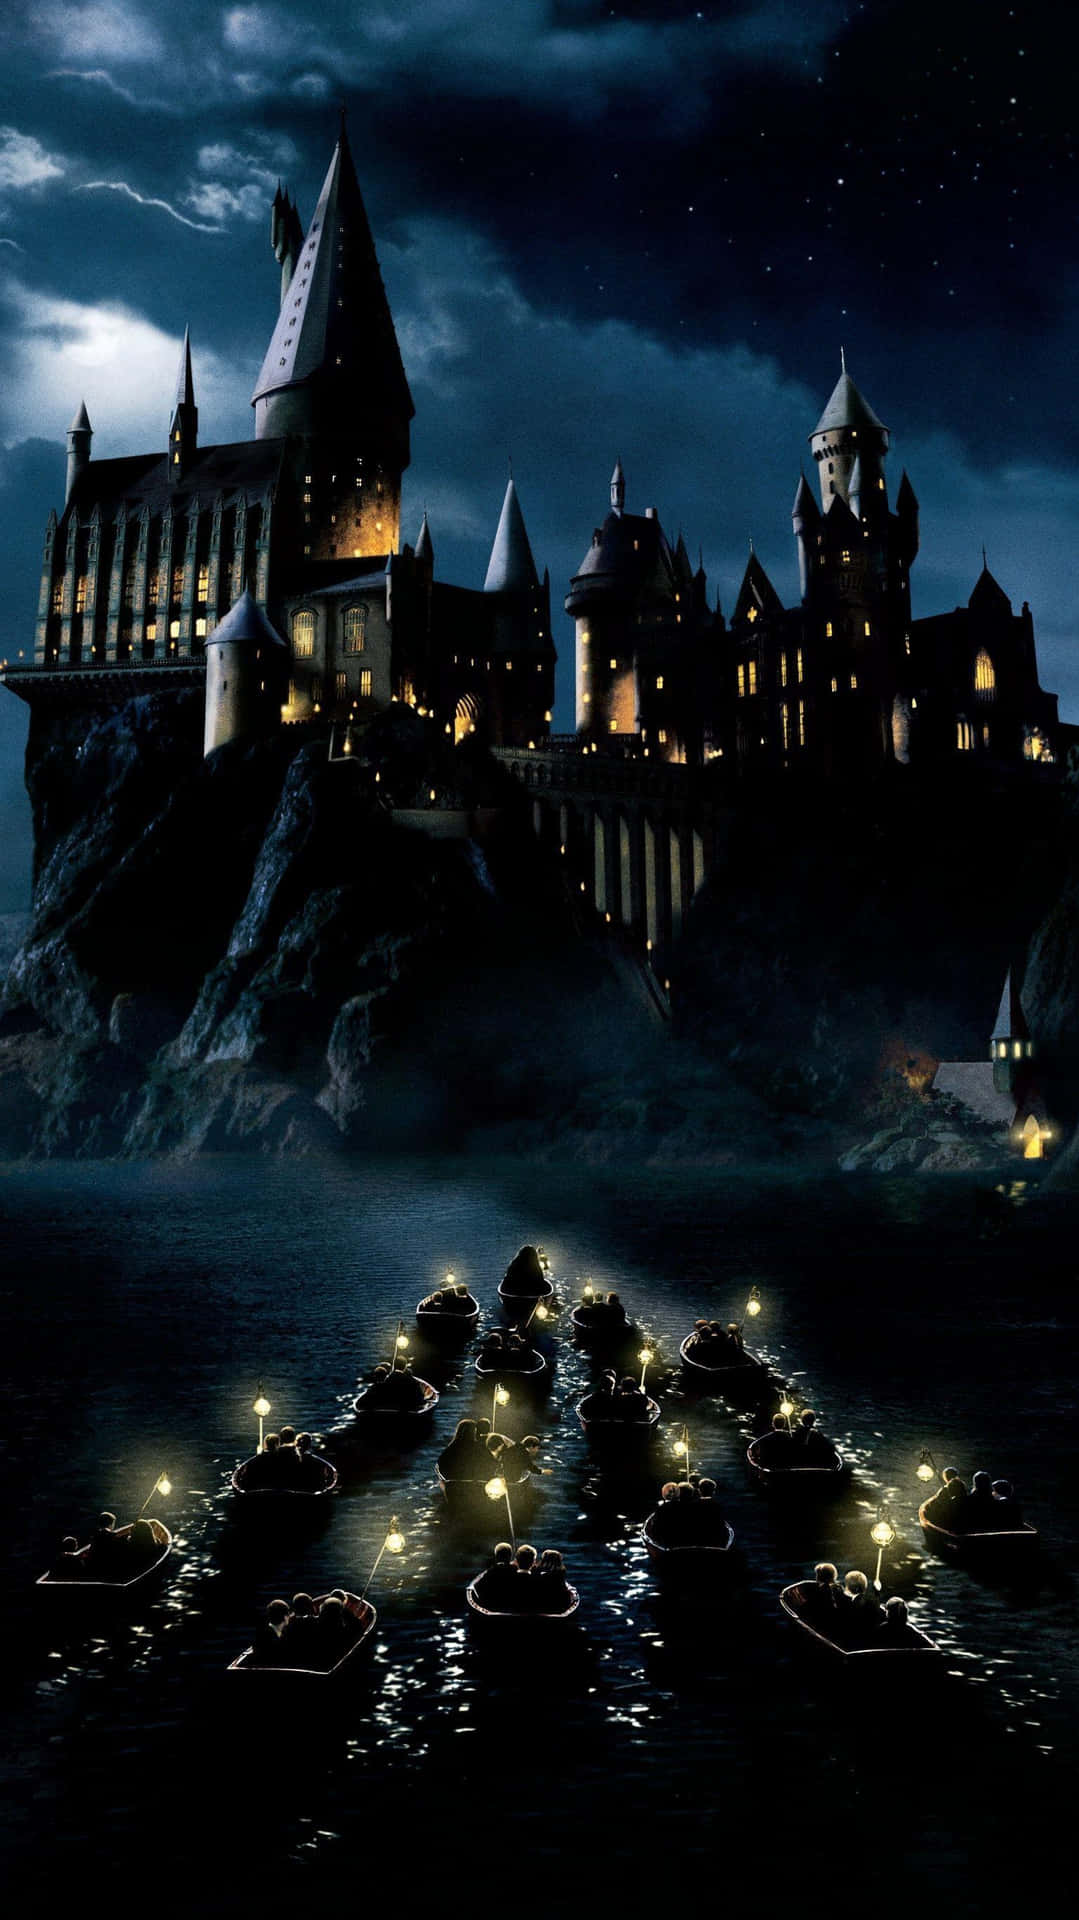 Take a deep breath and relax at The Hogwarts Lake Wallpaper